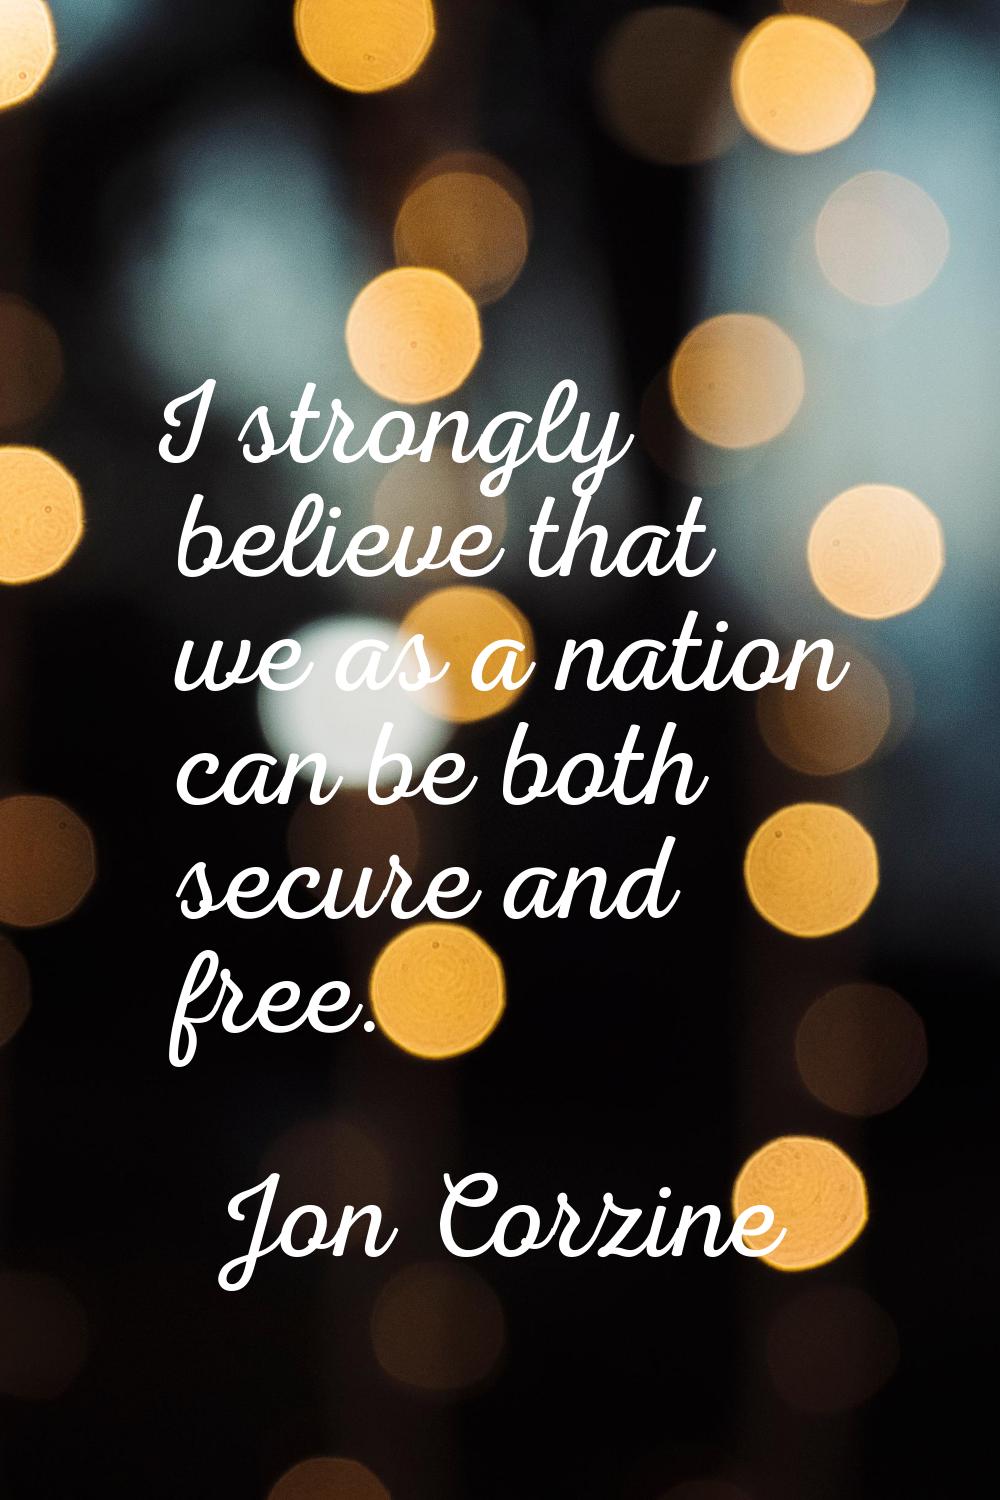 I strongly believe that we as a nation can be both secure and free.